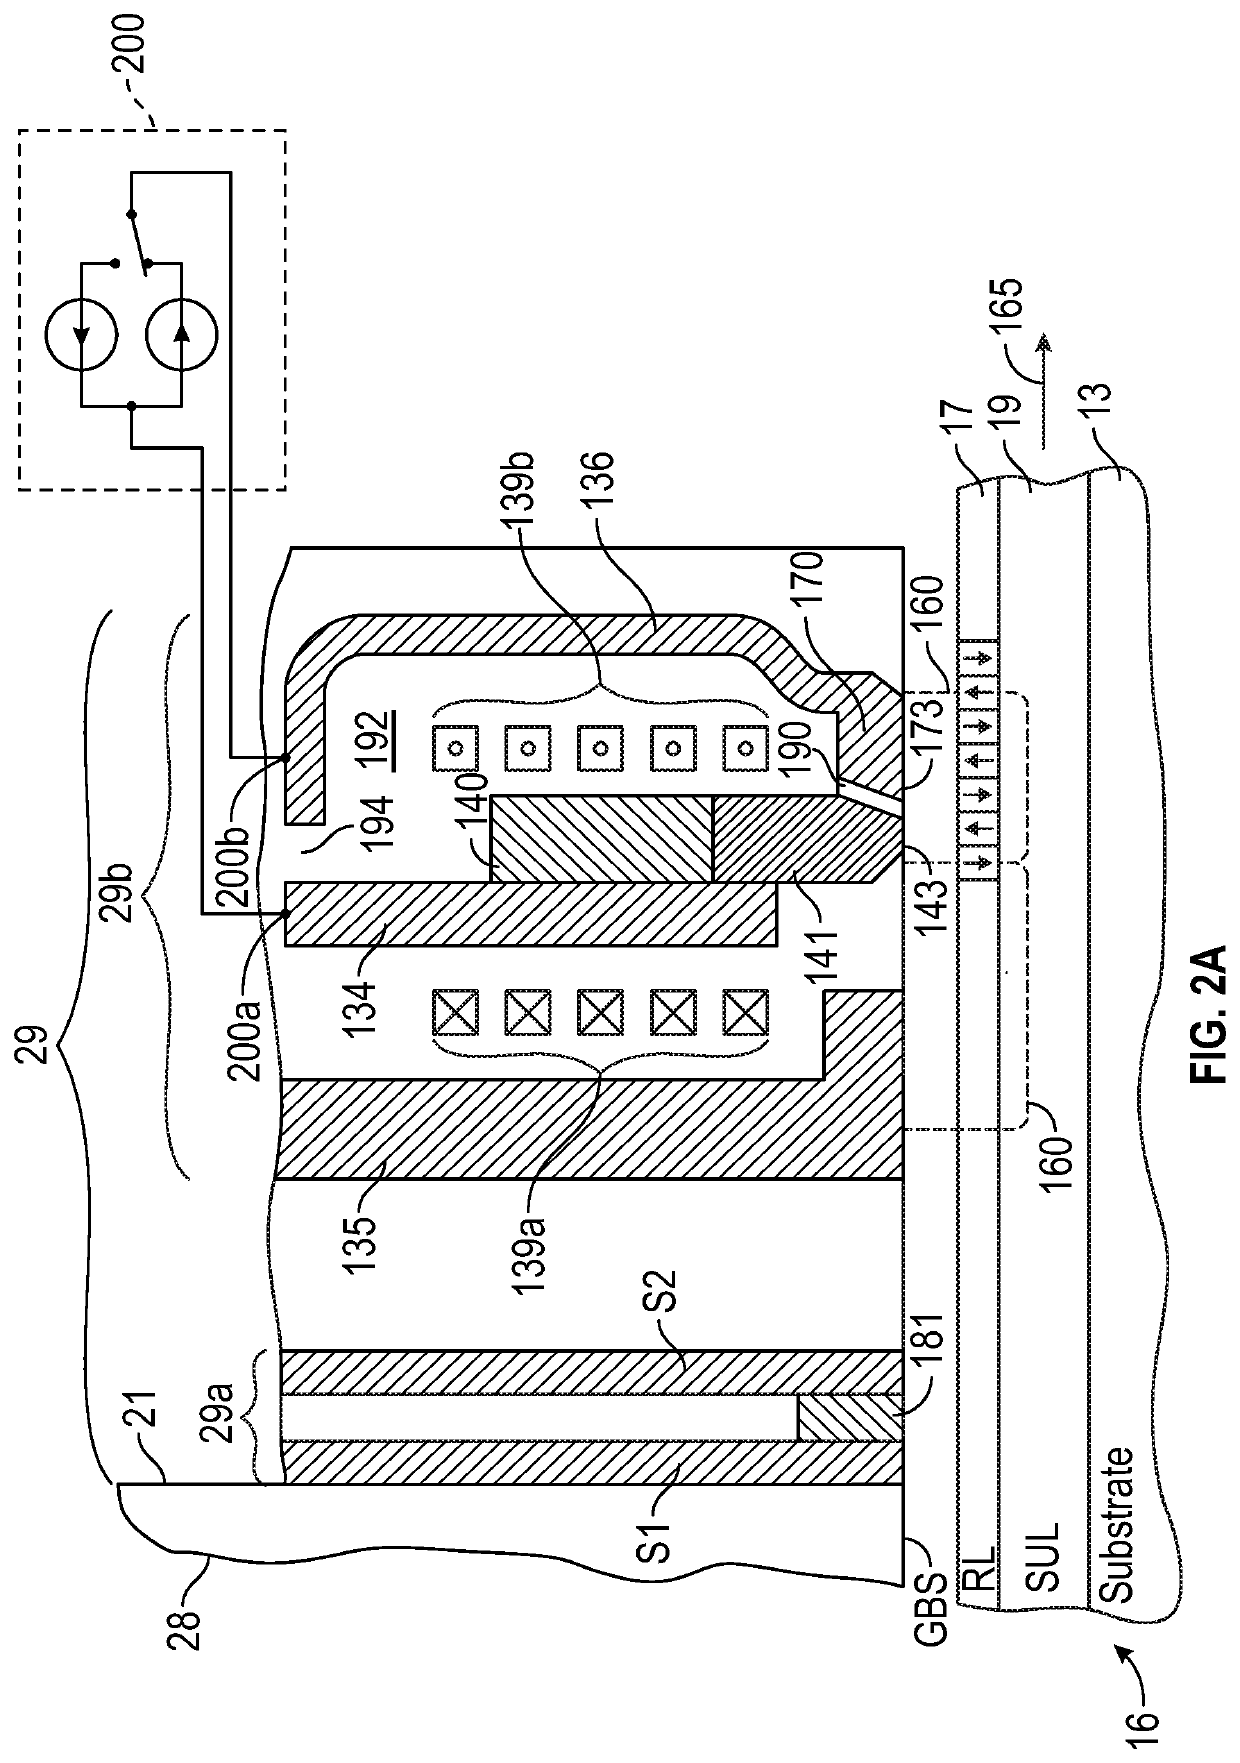 Current-assisted magnetic recording write head with improved write gap structure